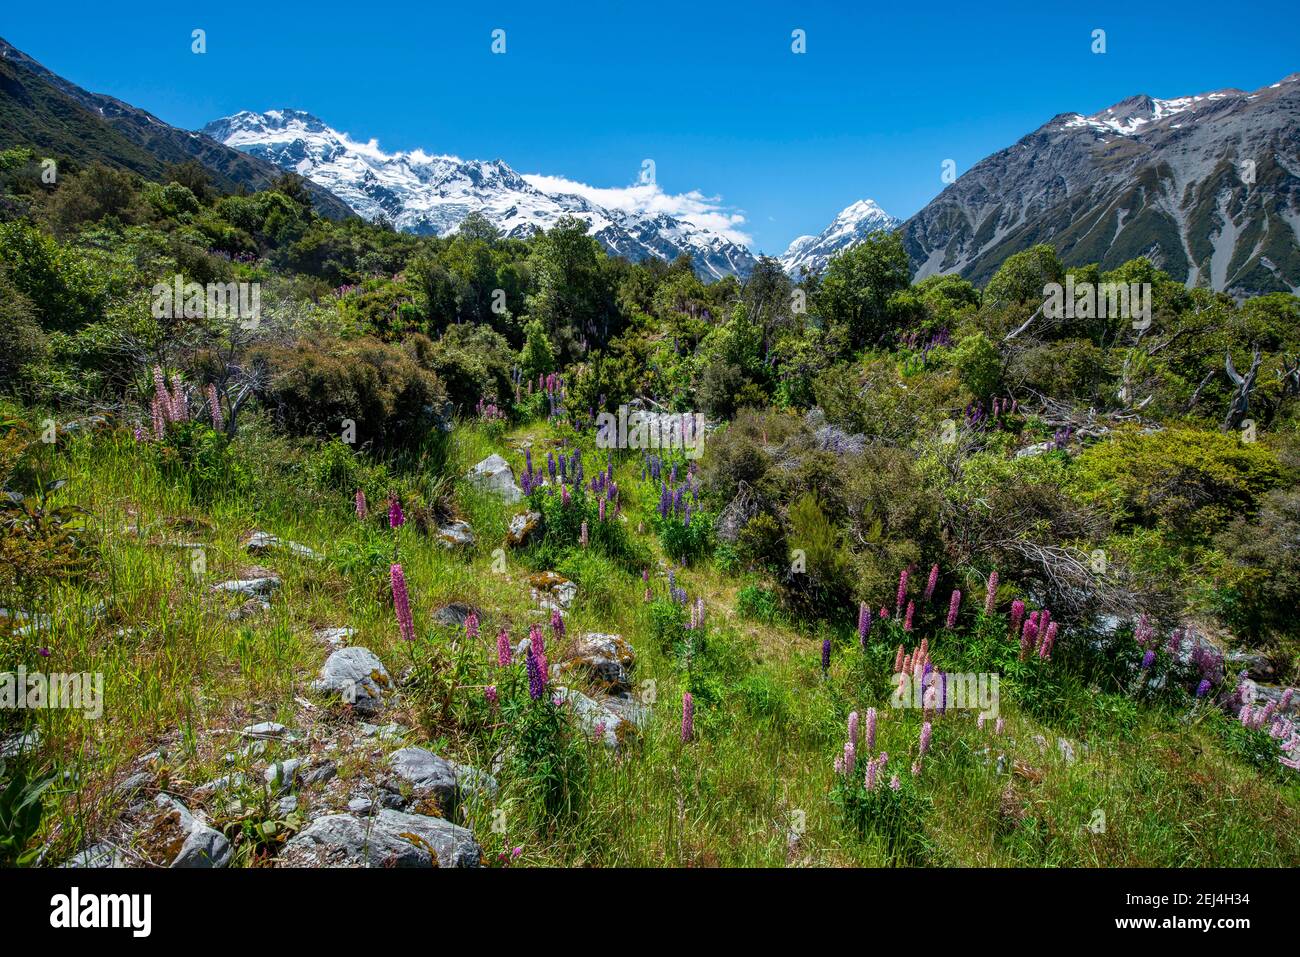 Purple multileaved lupines (Lupinus polyphyllus), snow-covered mountains with Mount Cook, Hooker Valley, Canterbury, South Island, New Zealand Stock Photo